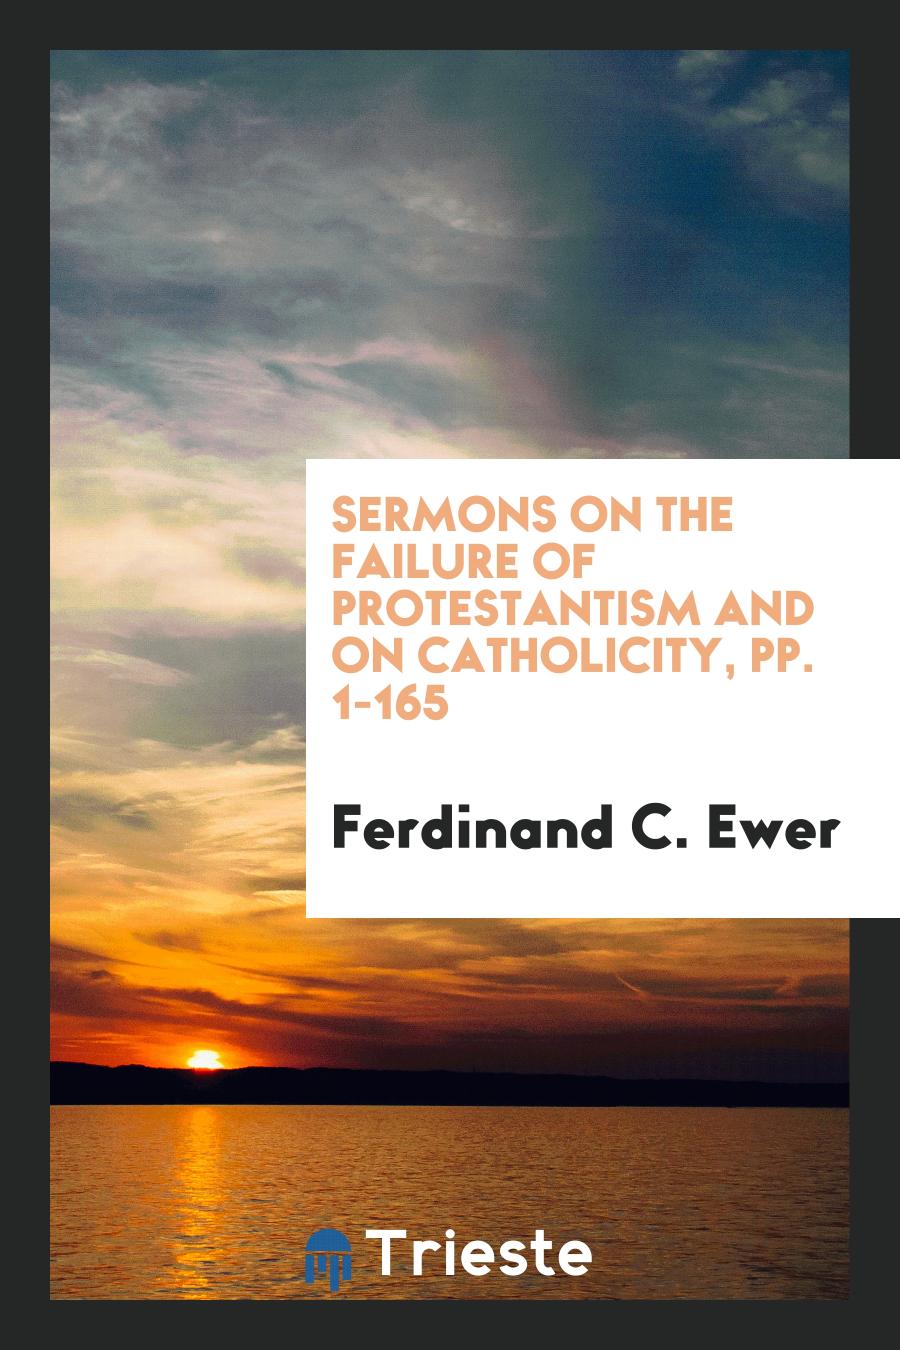 Sermons on the Failure of Protestantism and on Catholicity, pp. 1-165